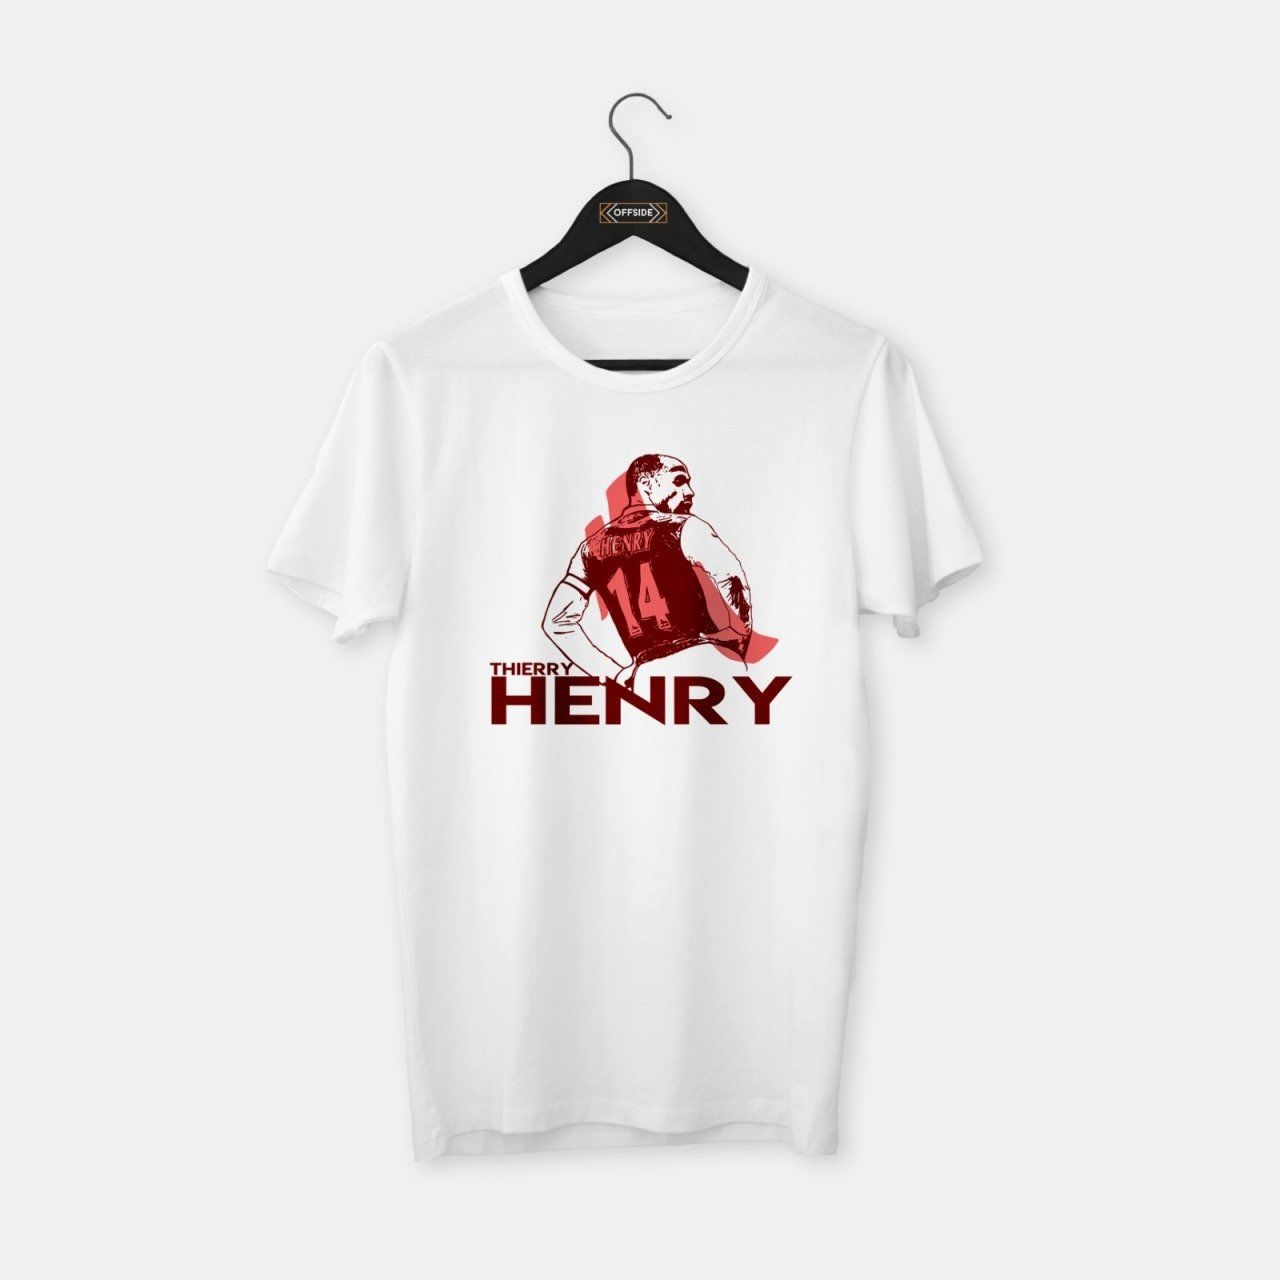 Thierry Henry III T-shirt